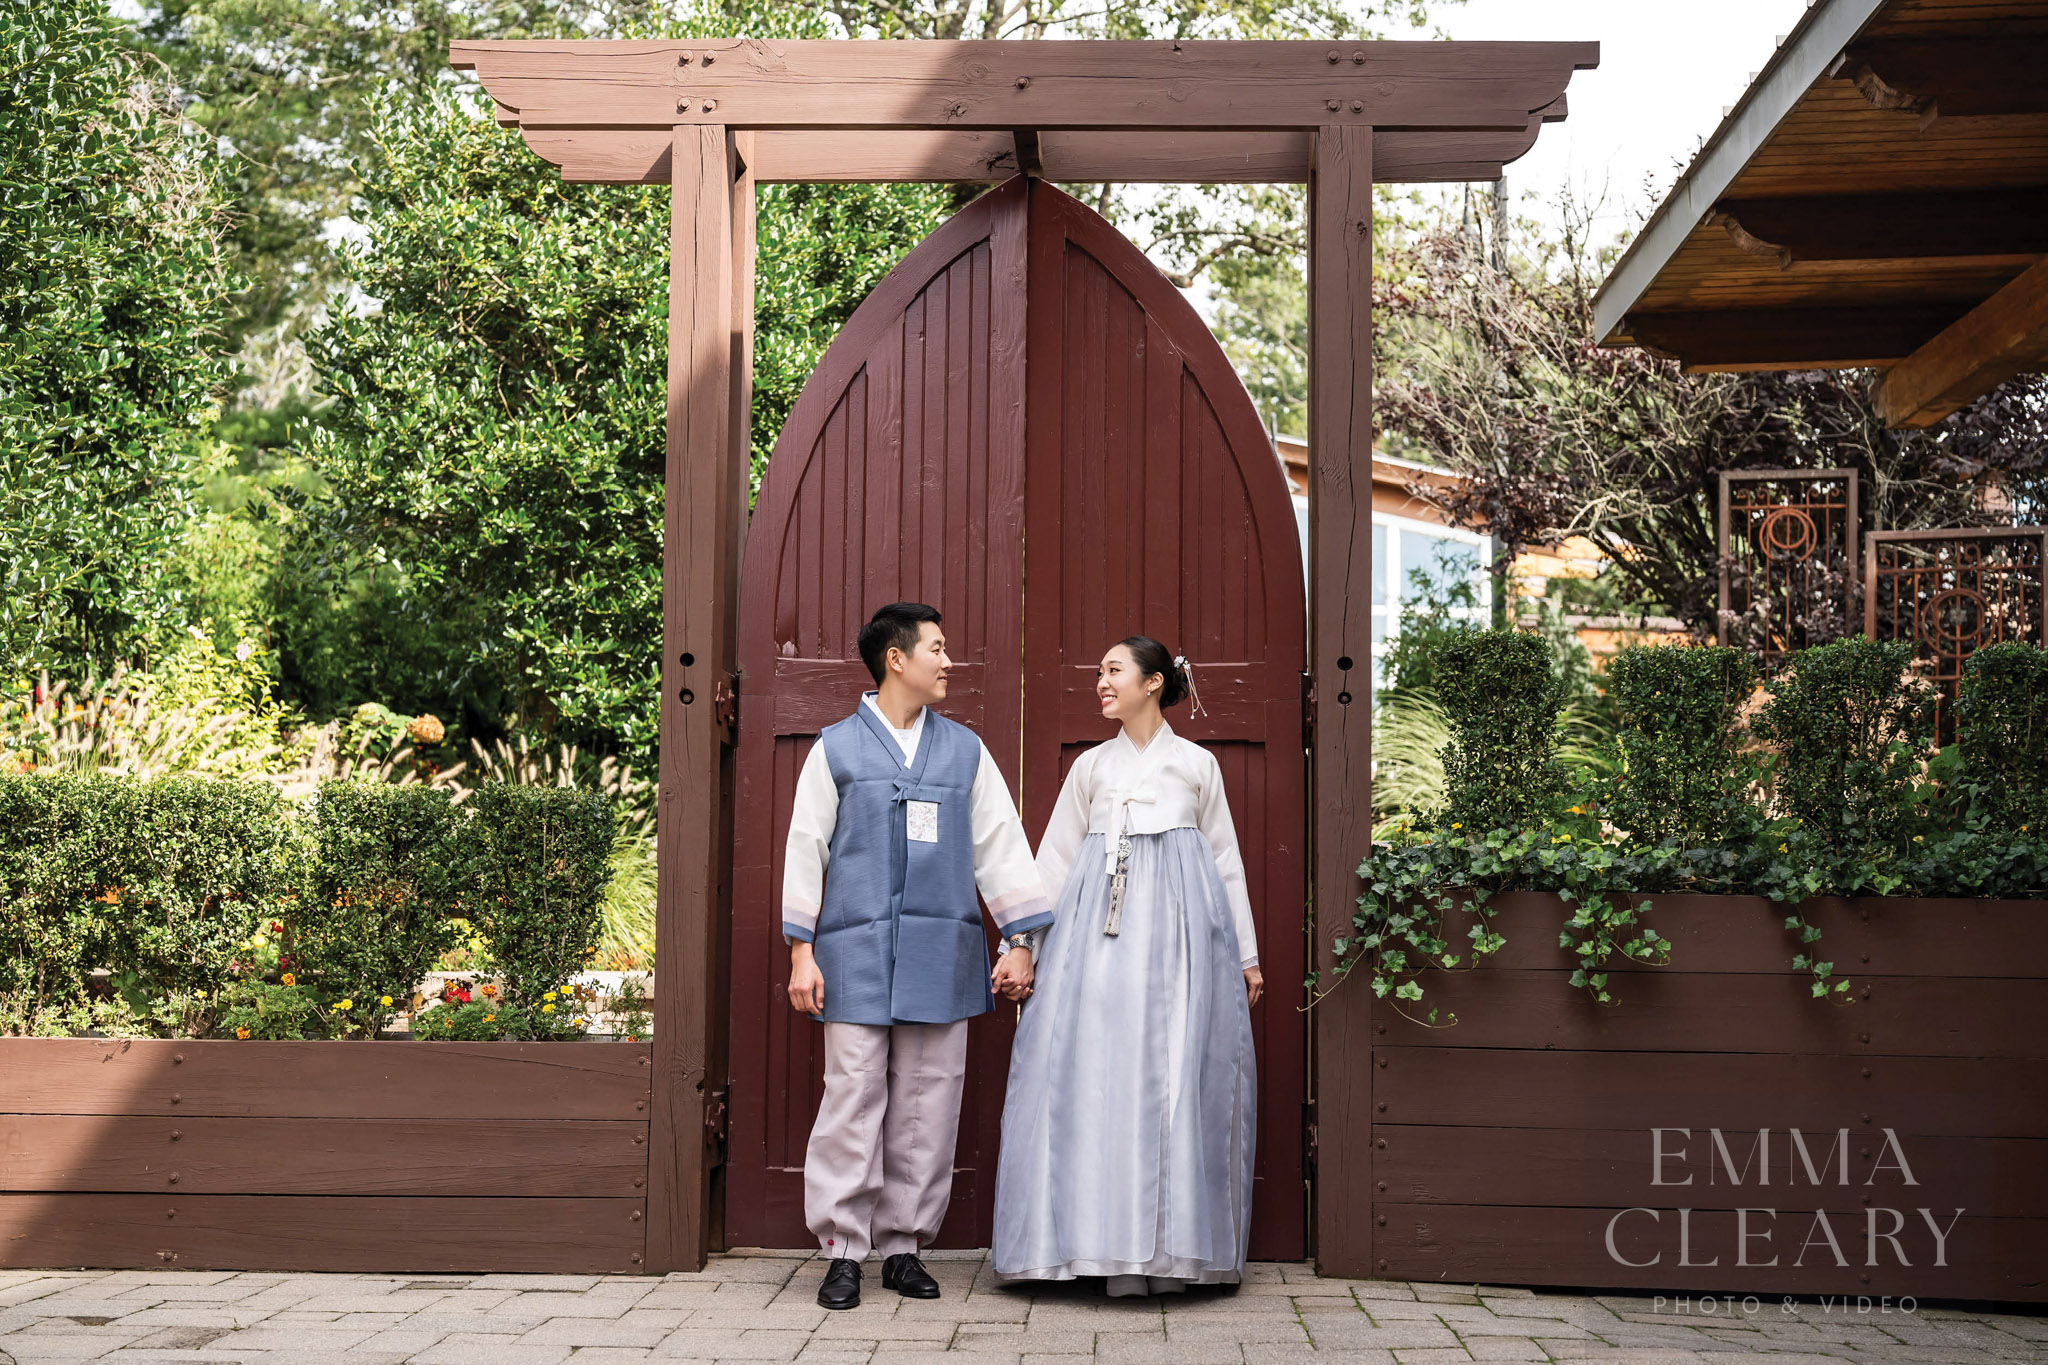 The bride and groom in traditional costumes